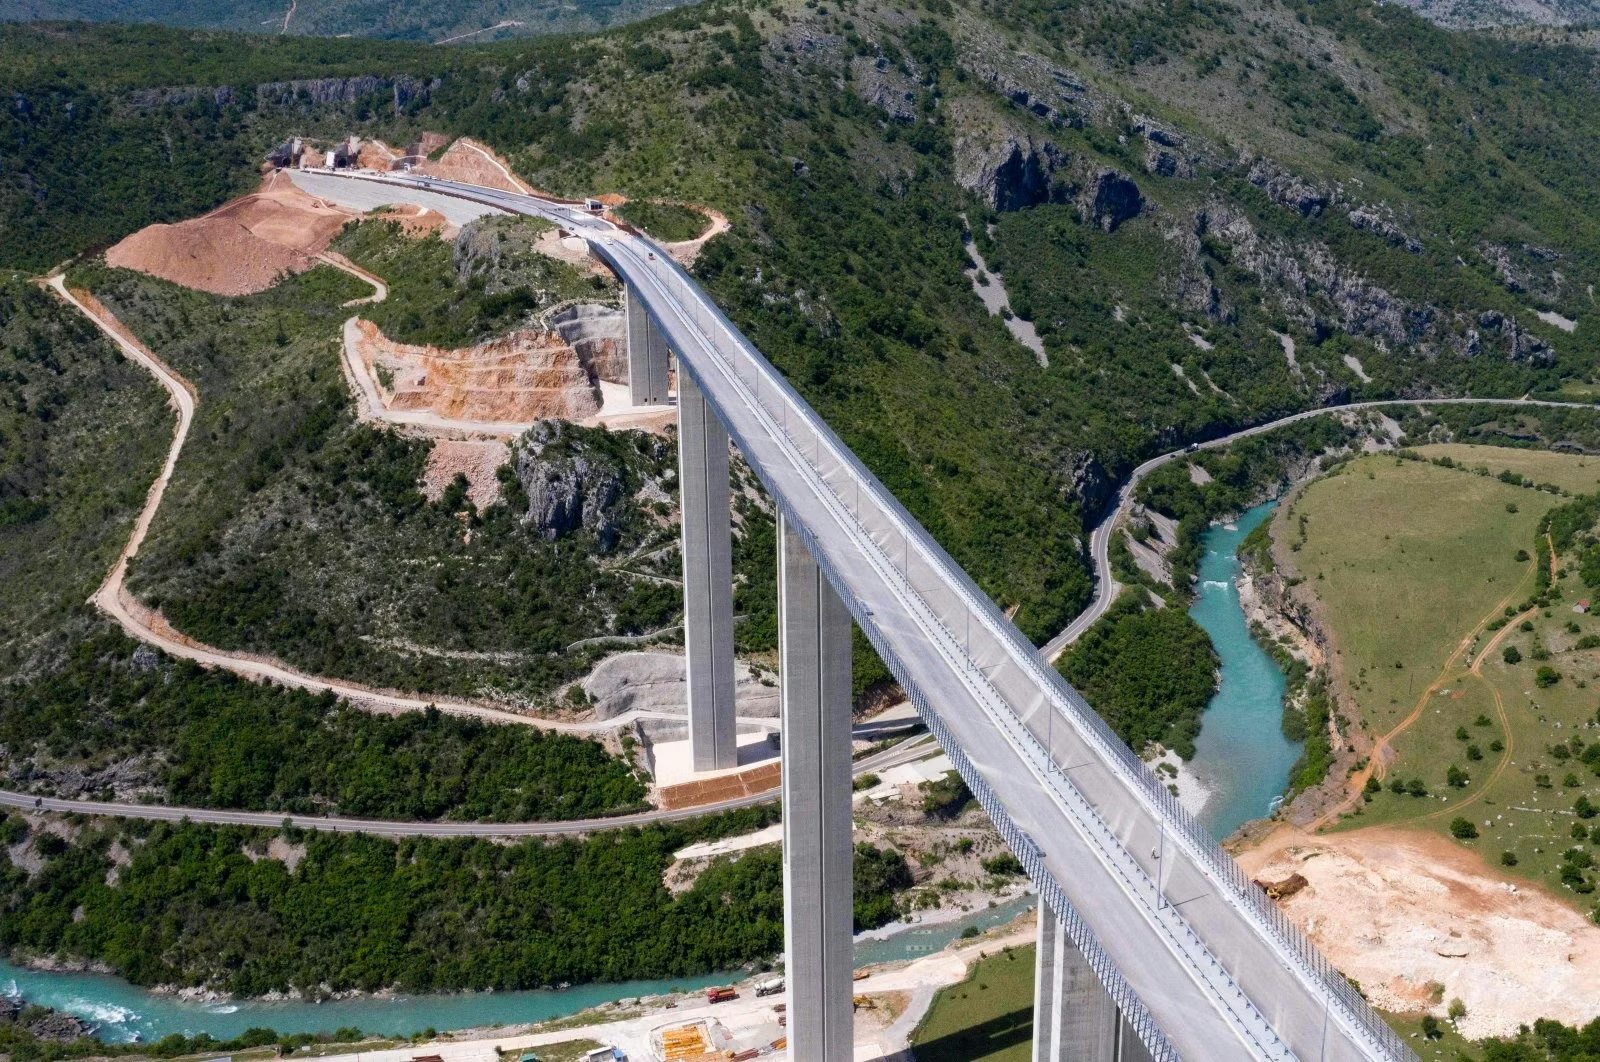 Highway from the city of Bar in Montenegro to Serbia near Matesevo, constructed by China Road and Bridge Corporation (CRBC)